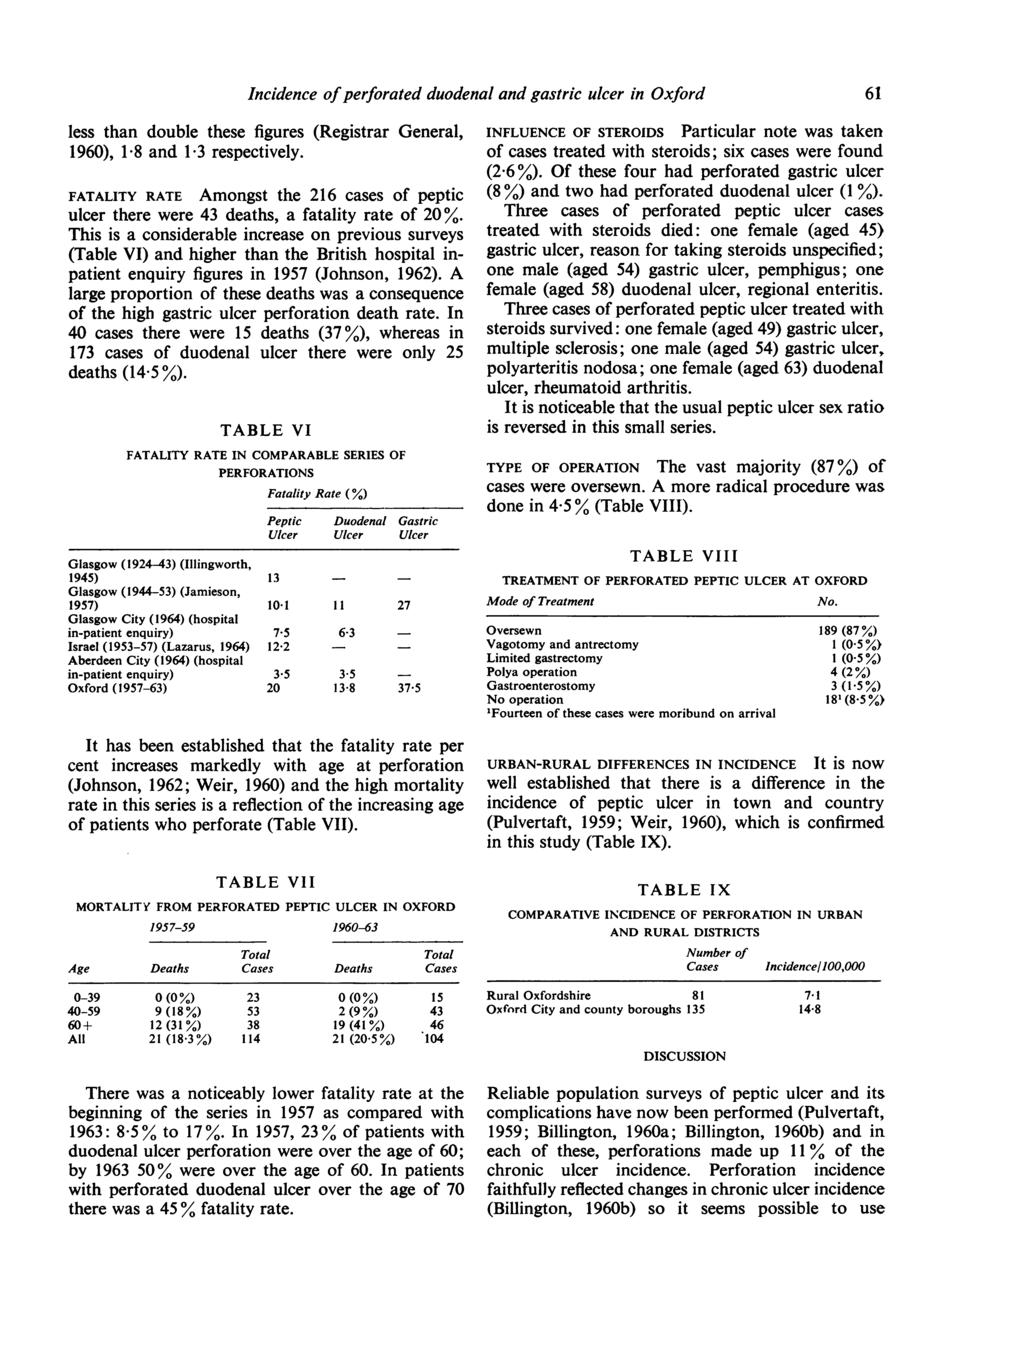 Incidence ofperforated duodenal and gastric ulcer in Oxford less than double these figures (Registrar General, 1960), 1.8 and 1.3 respectively.